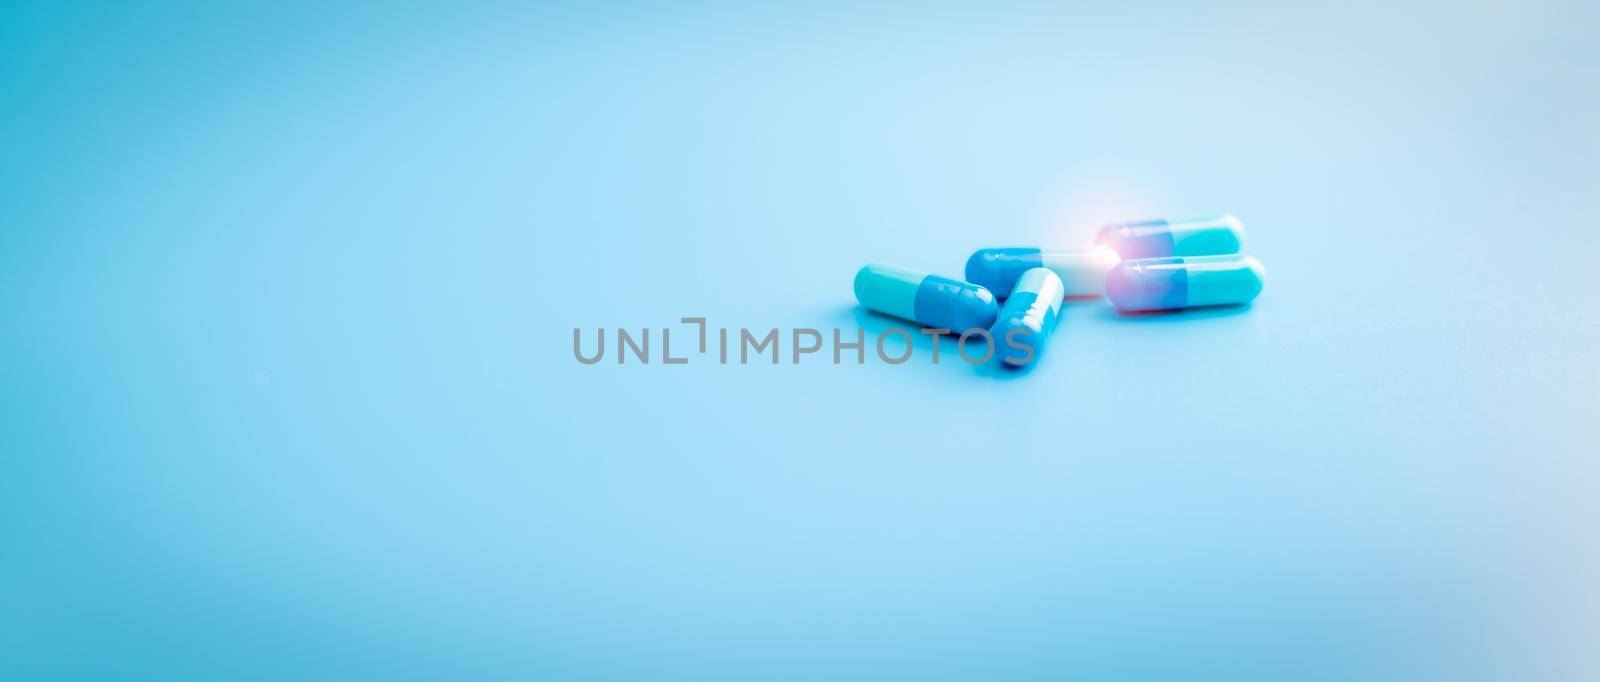 Blue capsule pills on blue background. Pharmacy shop banner. Pharmaceutical industry. Antibiotic capsule pills. Antibiotic drug resistance. Pharmaceutical industry. Prescription drugs. Drug research. by Fahroni